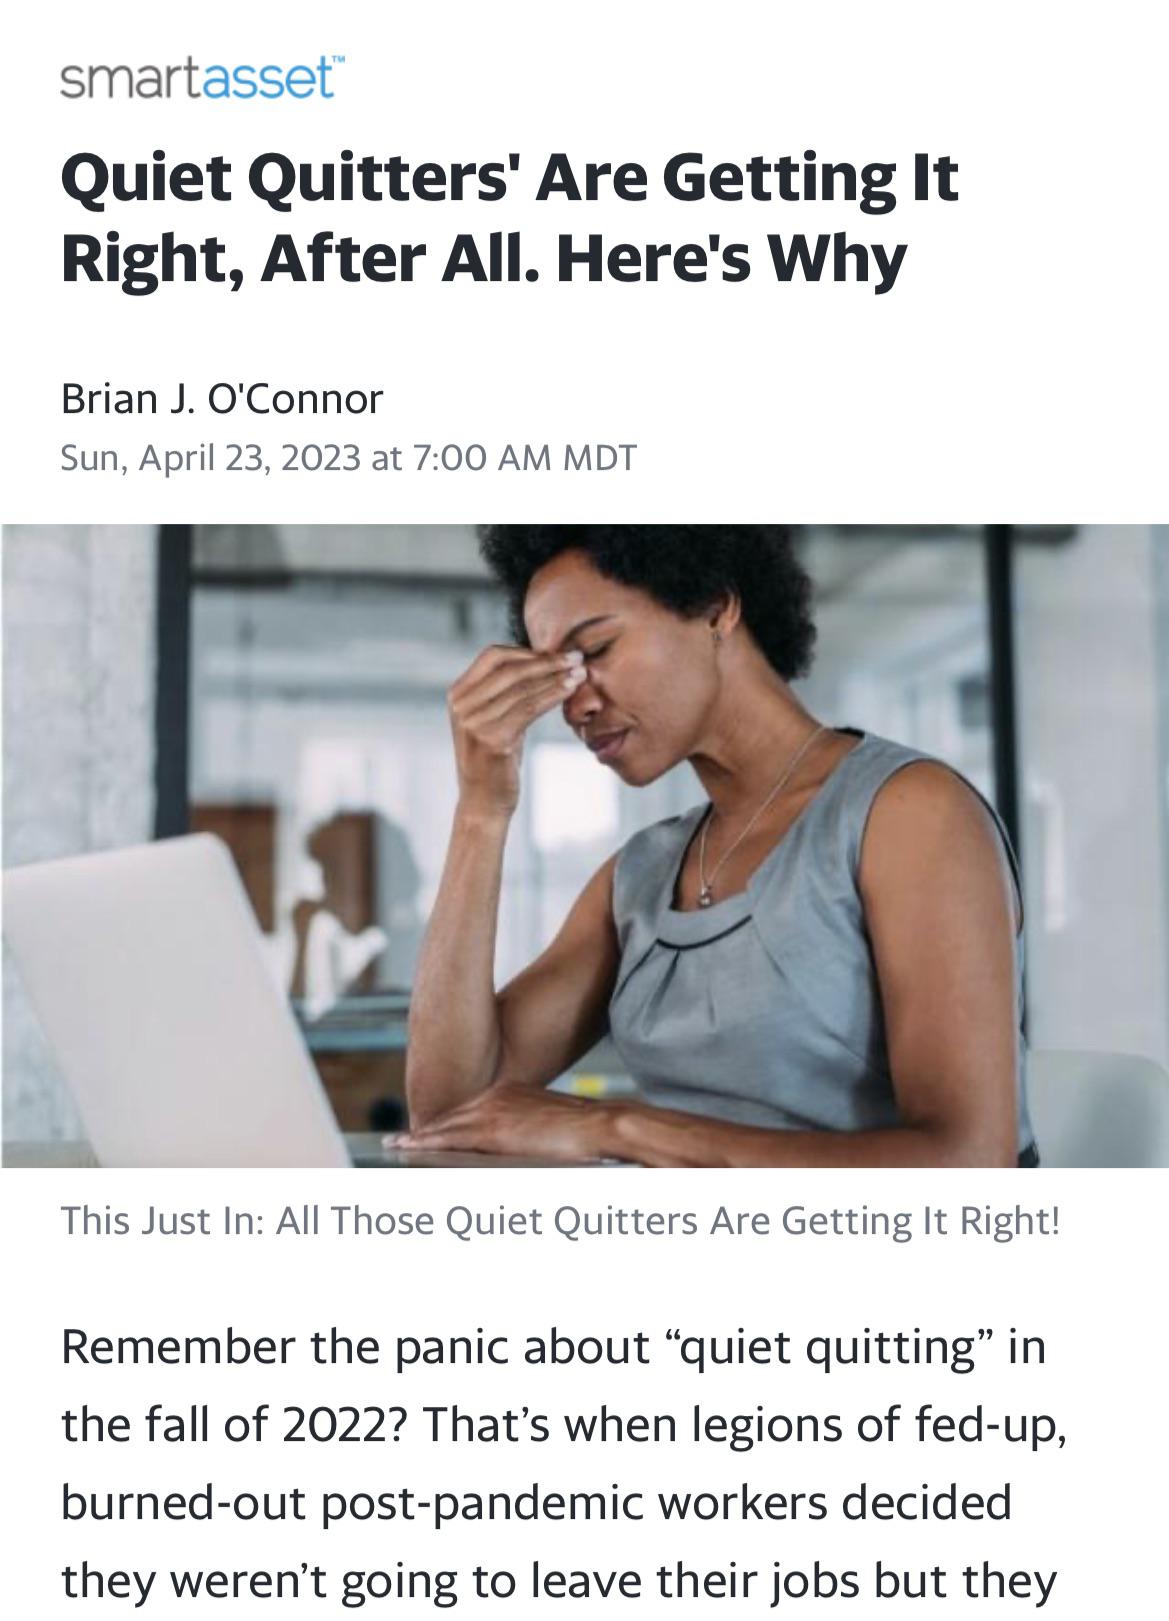 anitwork memes - conversation - smartasset Quiet Quitters' Are Getting It Right, After All. Here's Why Brian J. O'Connor Sun, at Mdt This Just In All Those Quiet Quitters Are Getting It Right! Remember the panic about "quiet quitting" in the fall of 2022?